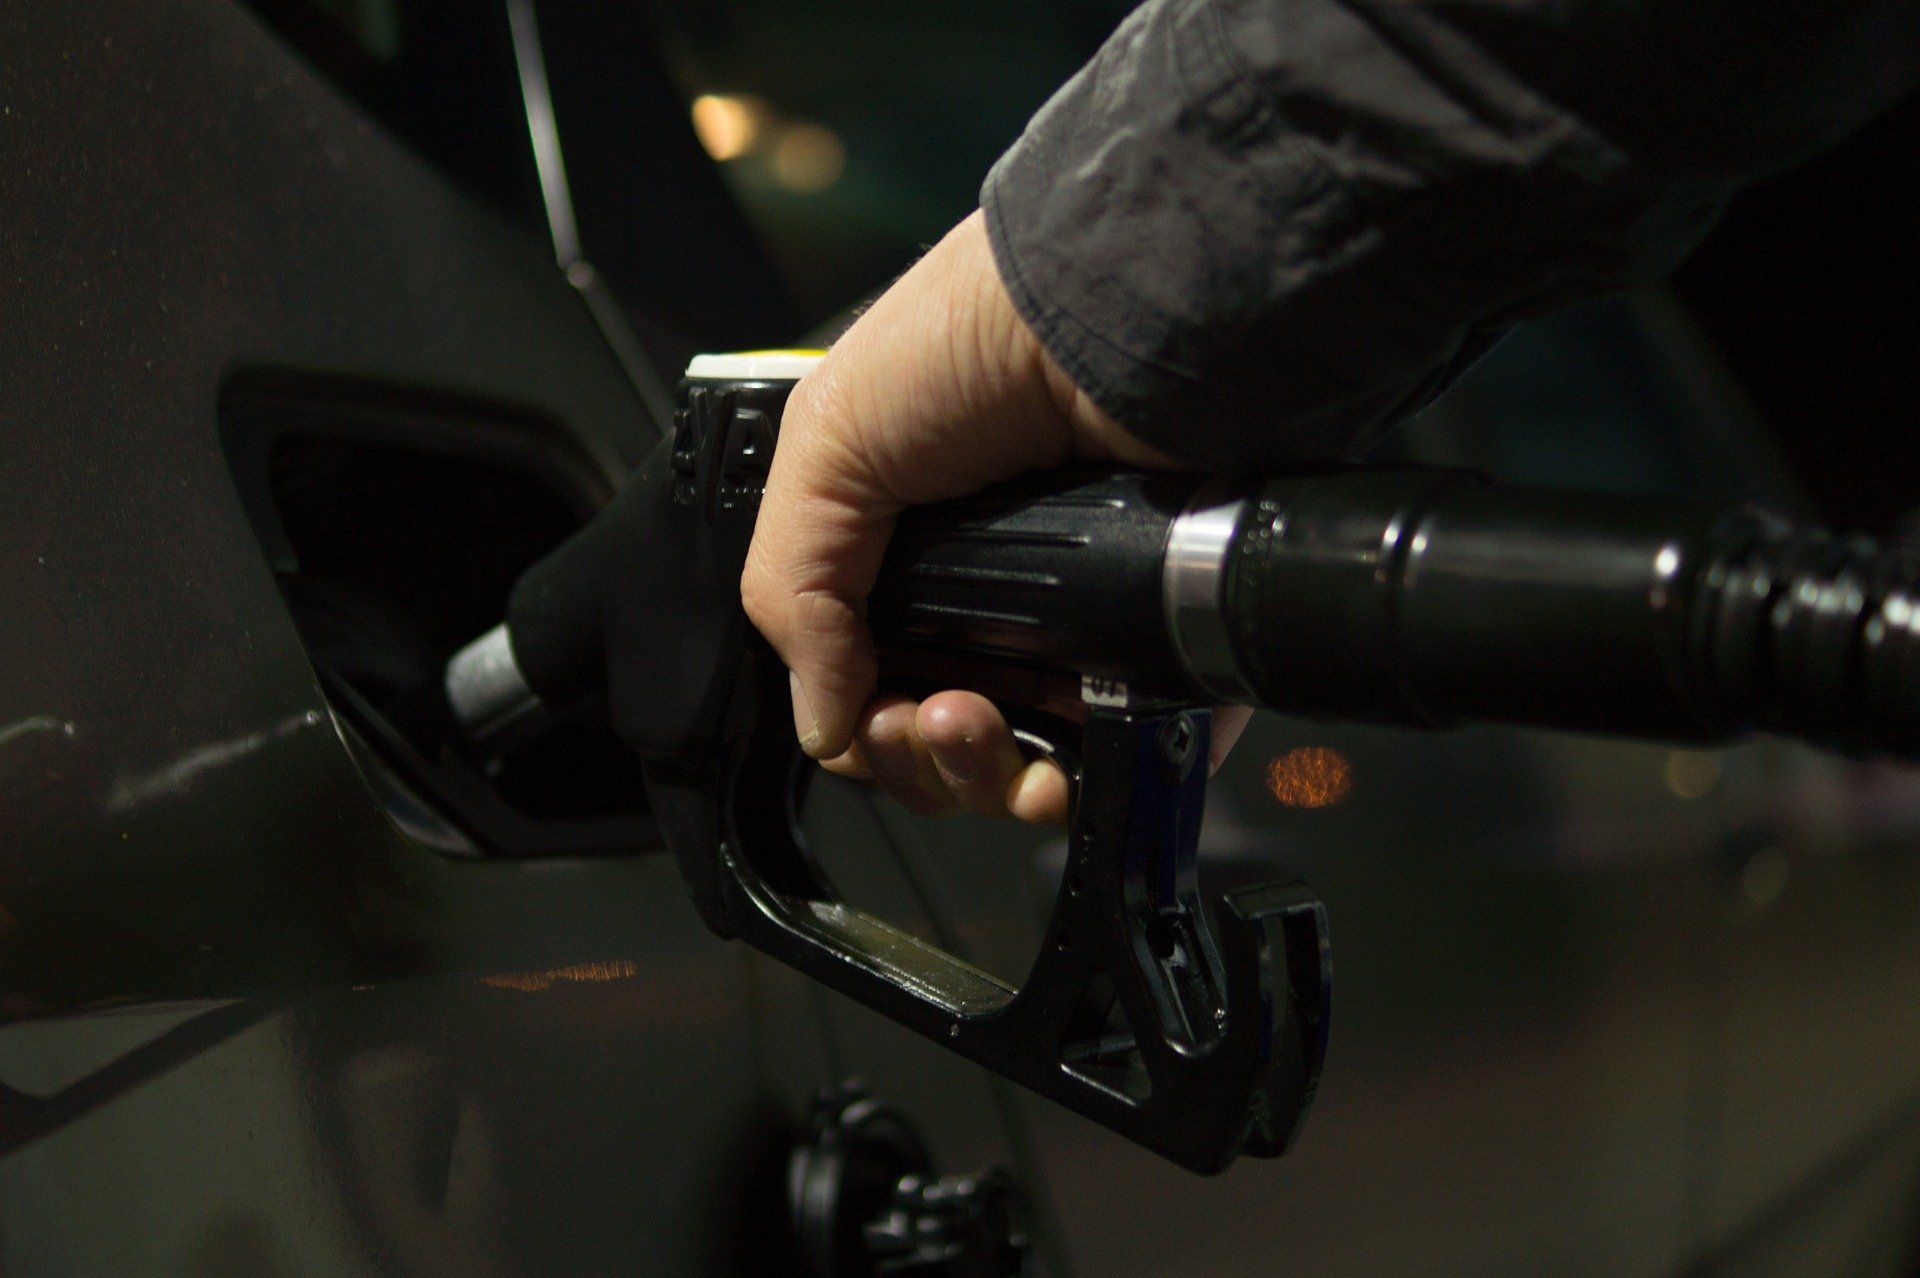 Fuel prices: Petrol priced at Rs 95.41, diesel Rs 86.67 in Delhi on March 9, 2022